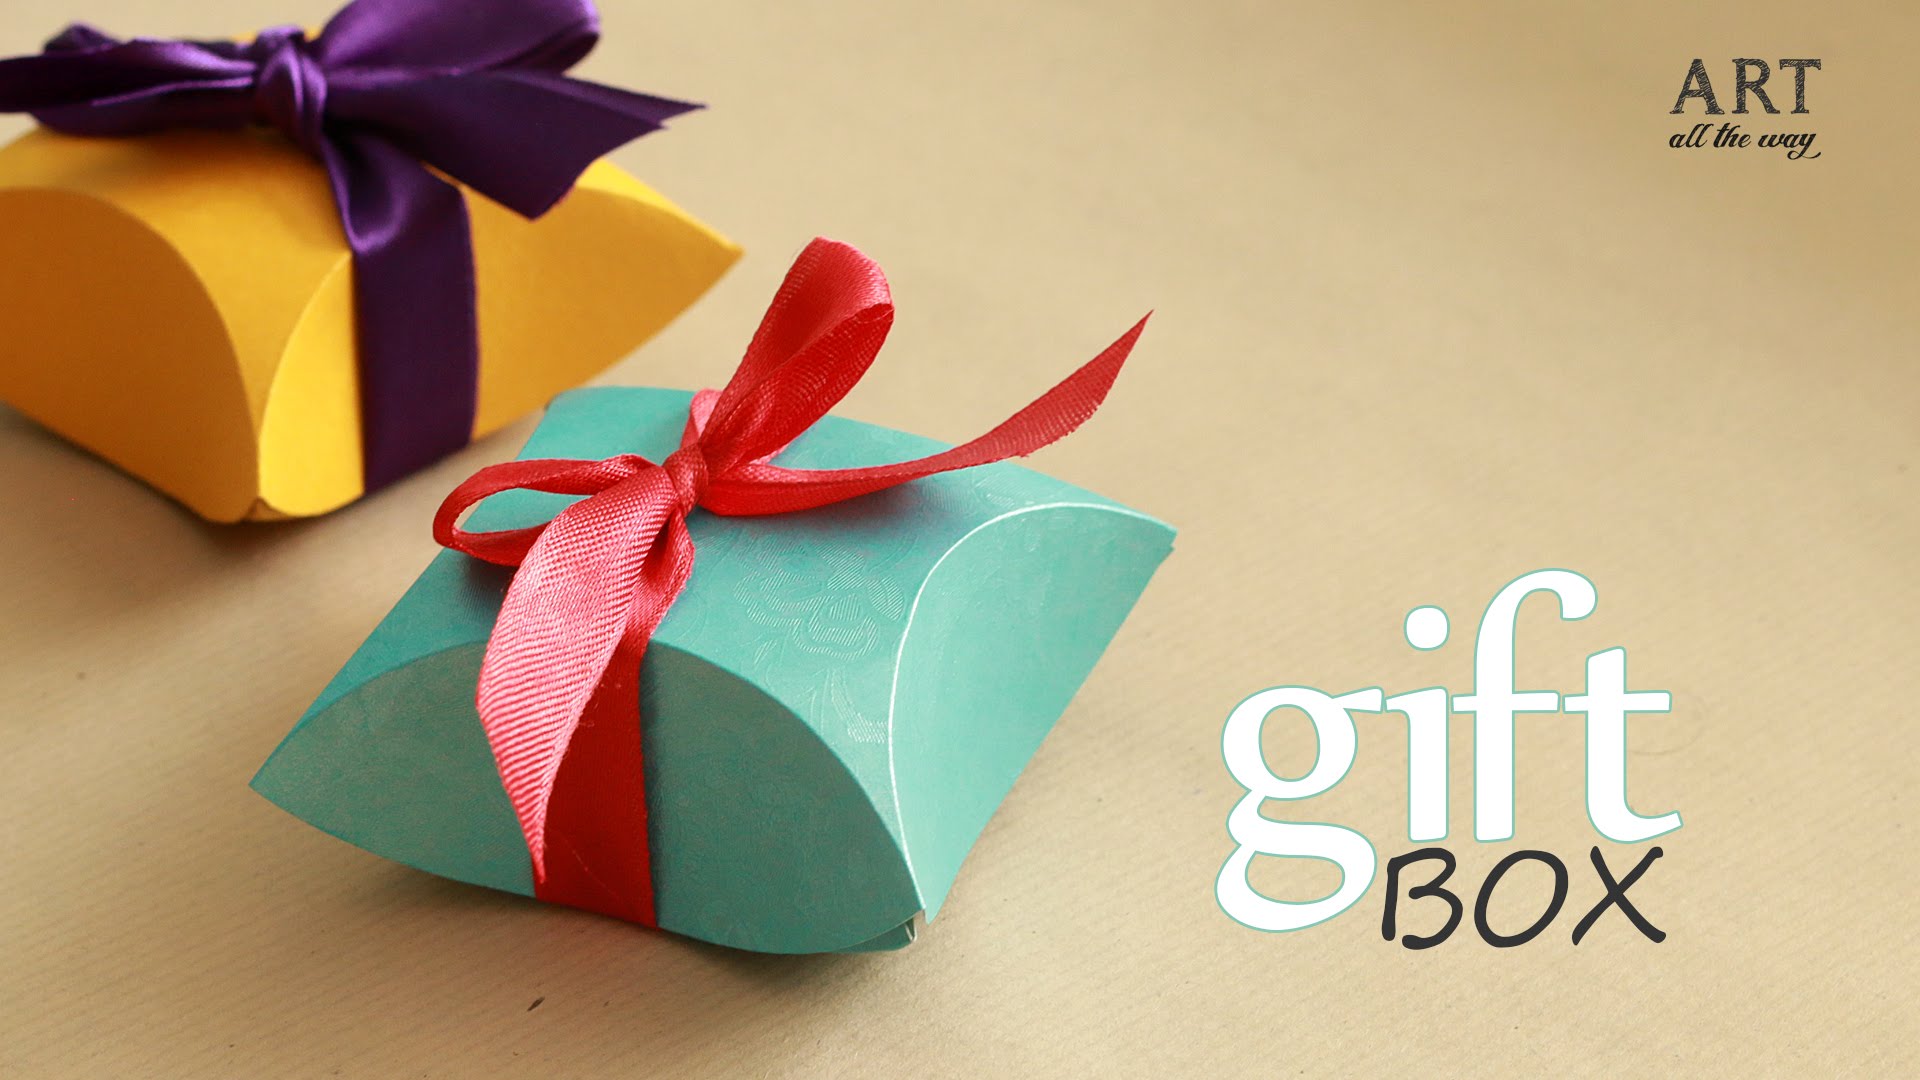 How To Make A Diamond-Shaped Gift Package In Five Minutes Using A CD